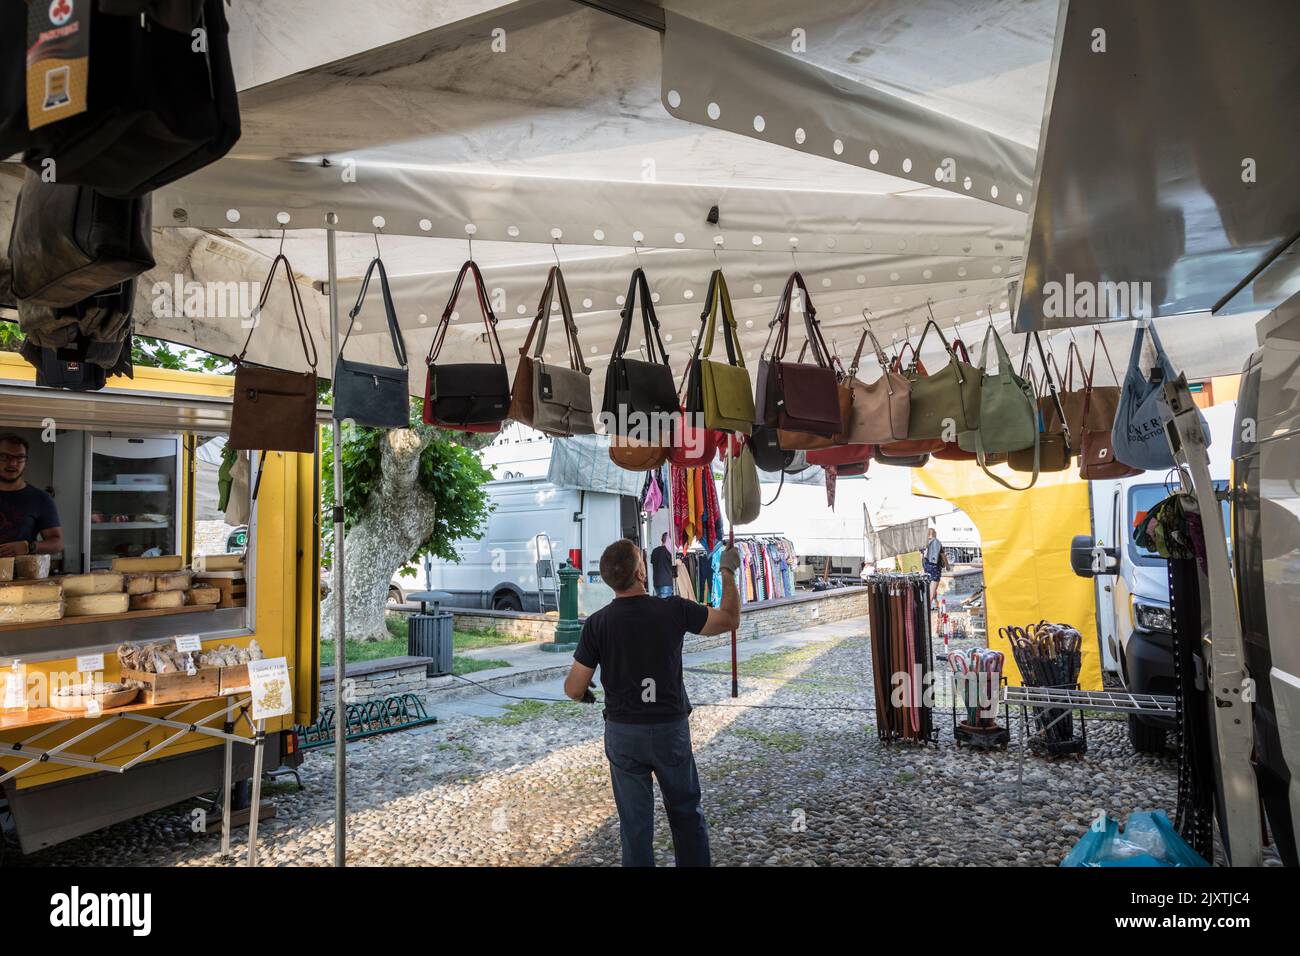 Market trader hangs up leather bags ready for sale on his stall, Italy Stock Photo